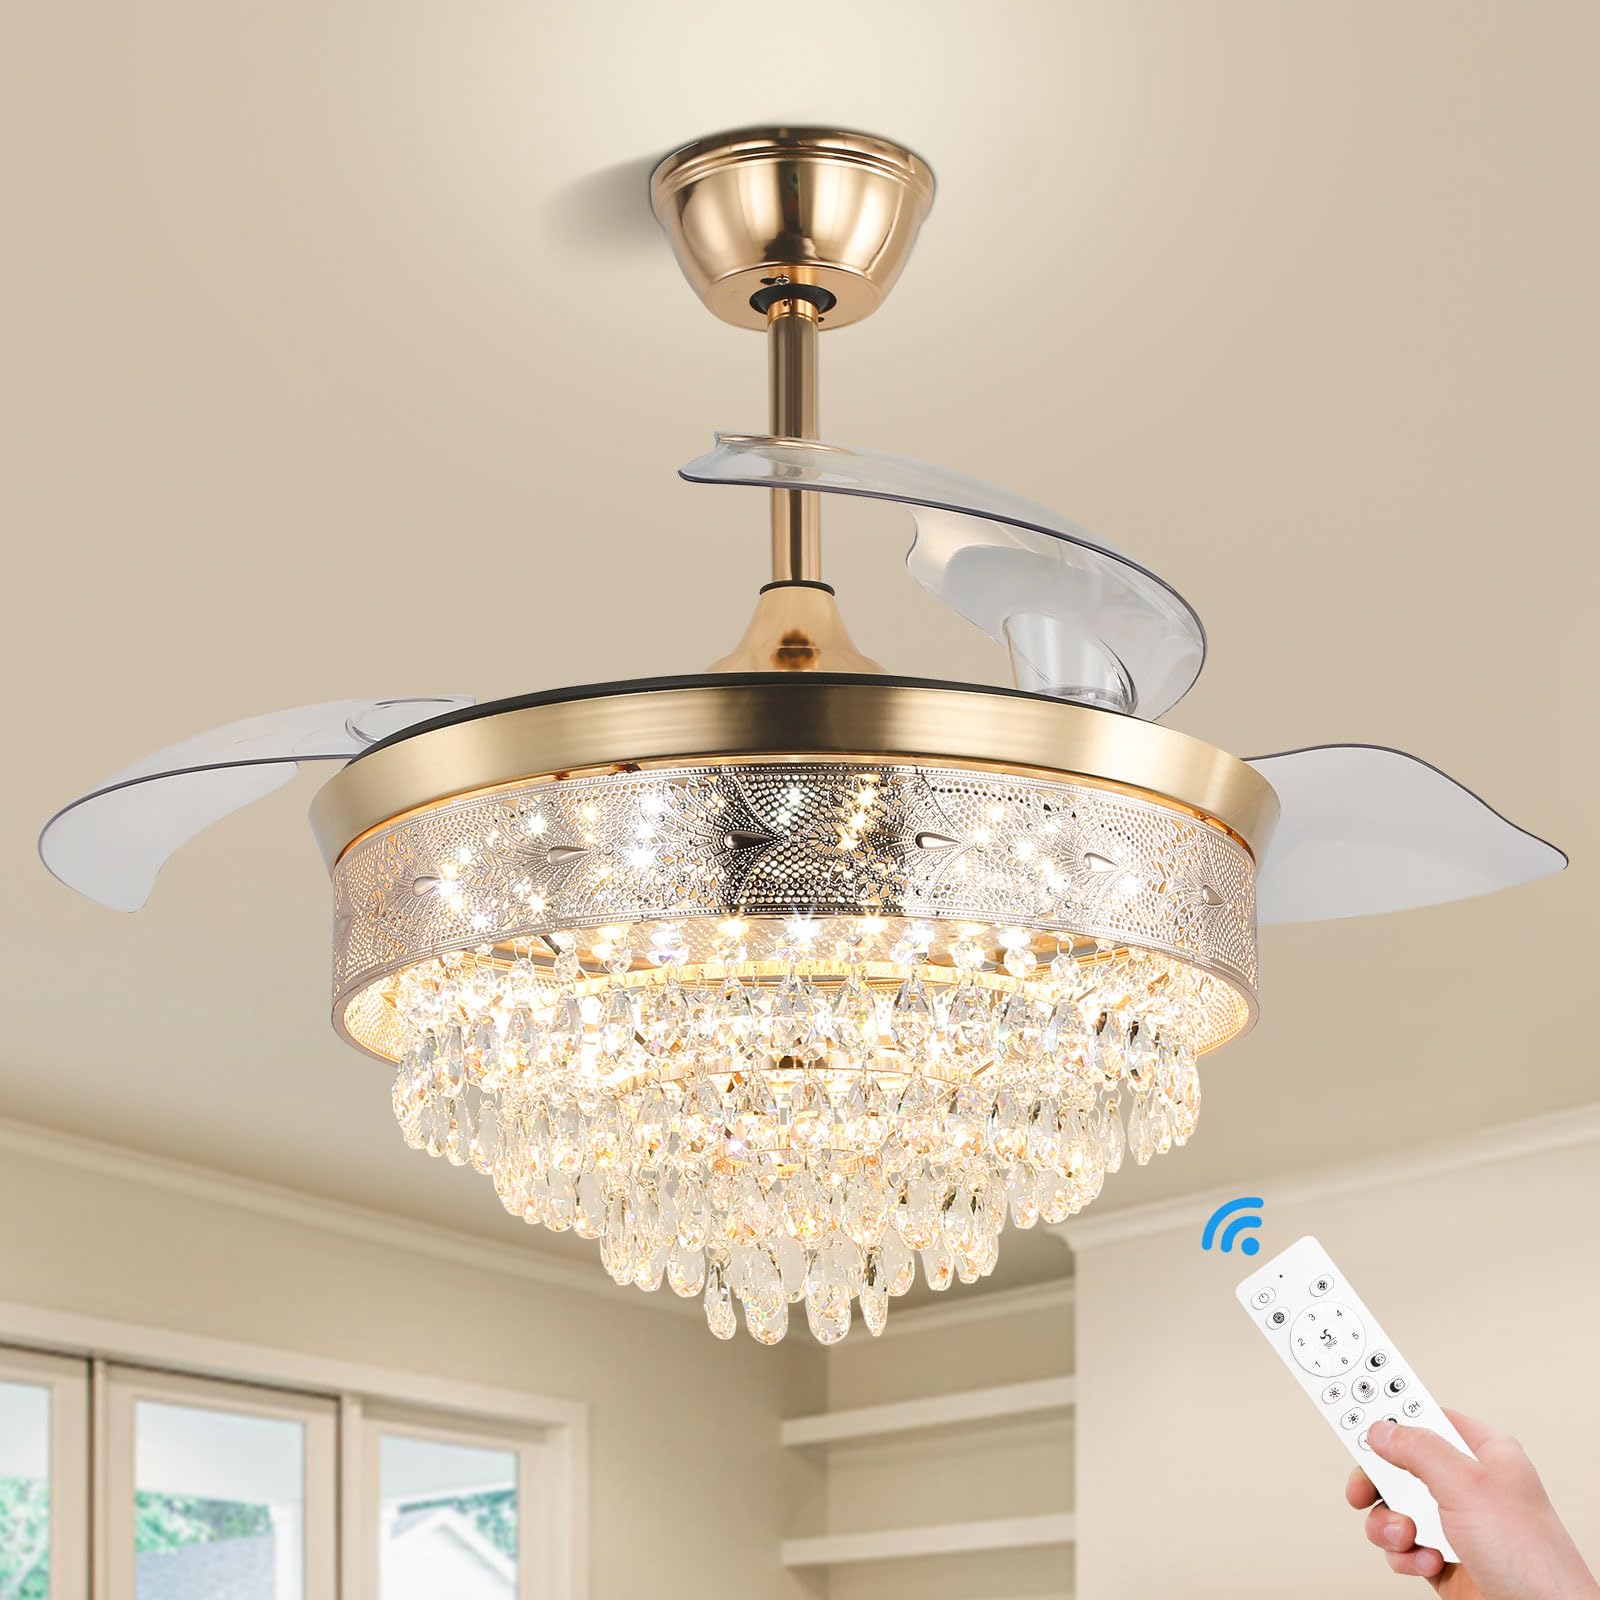 42'' Modern Crystal Ceiling Fandelier Chandeliers Dimmable LED Ceiling Fans with Light Remote Control Retractable Crystal Fandeliers for Bedrooms, APP & Memory Function, 6 Speeds